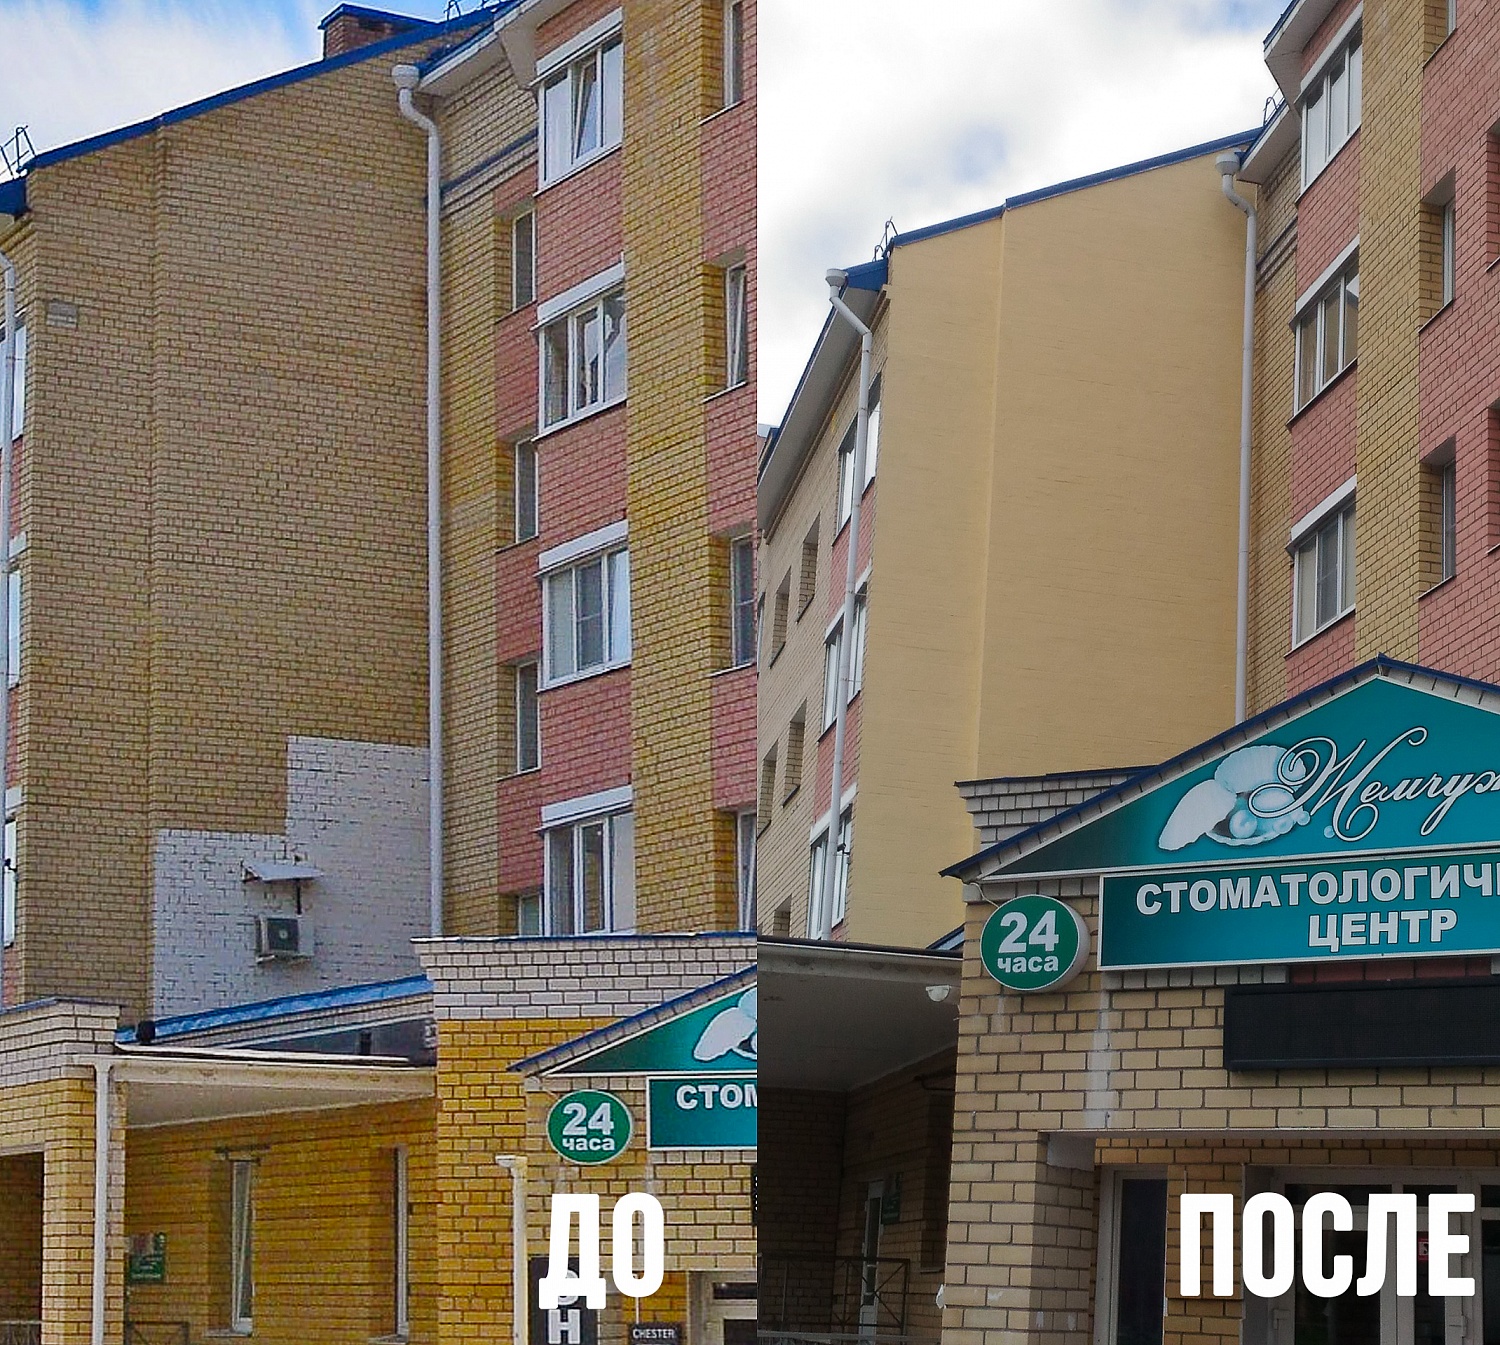 Thermal insulation Bronya Facade in the HOA in Cherepovets on the "problem wall". (Photo)